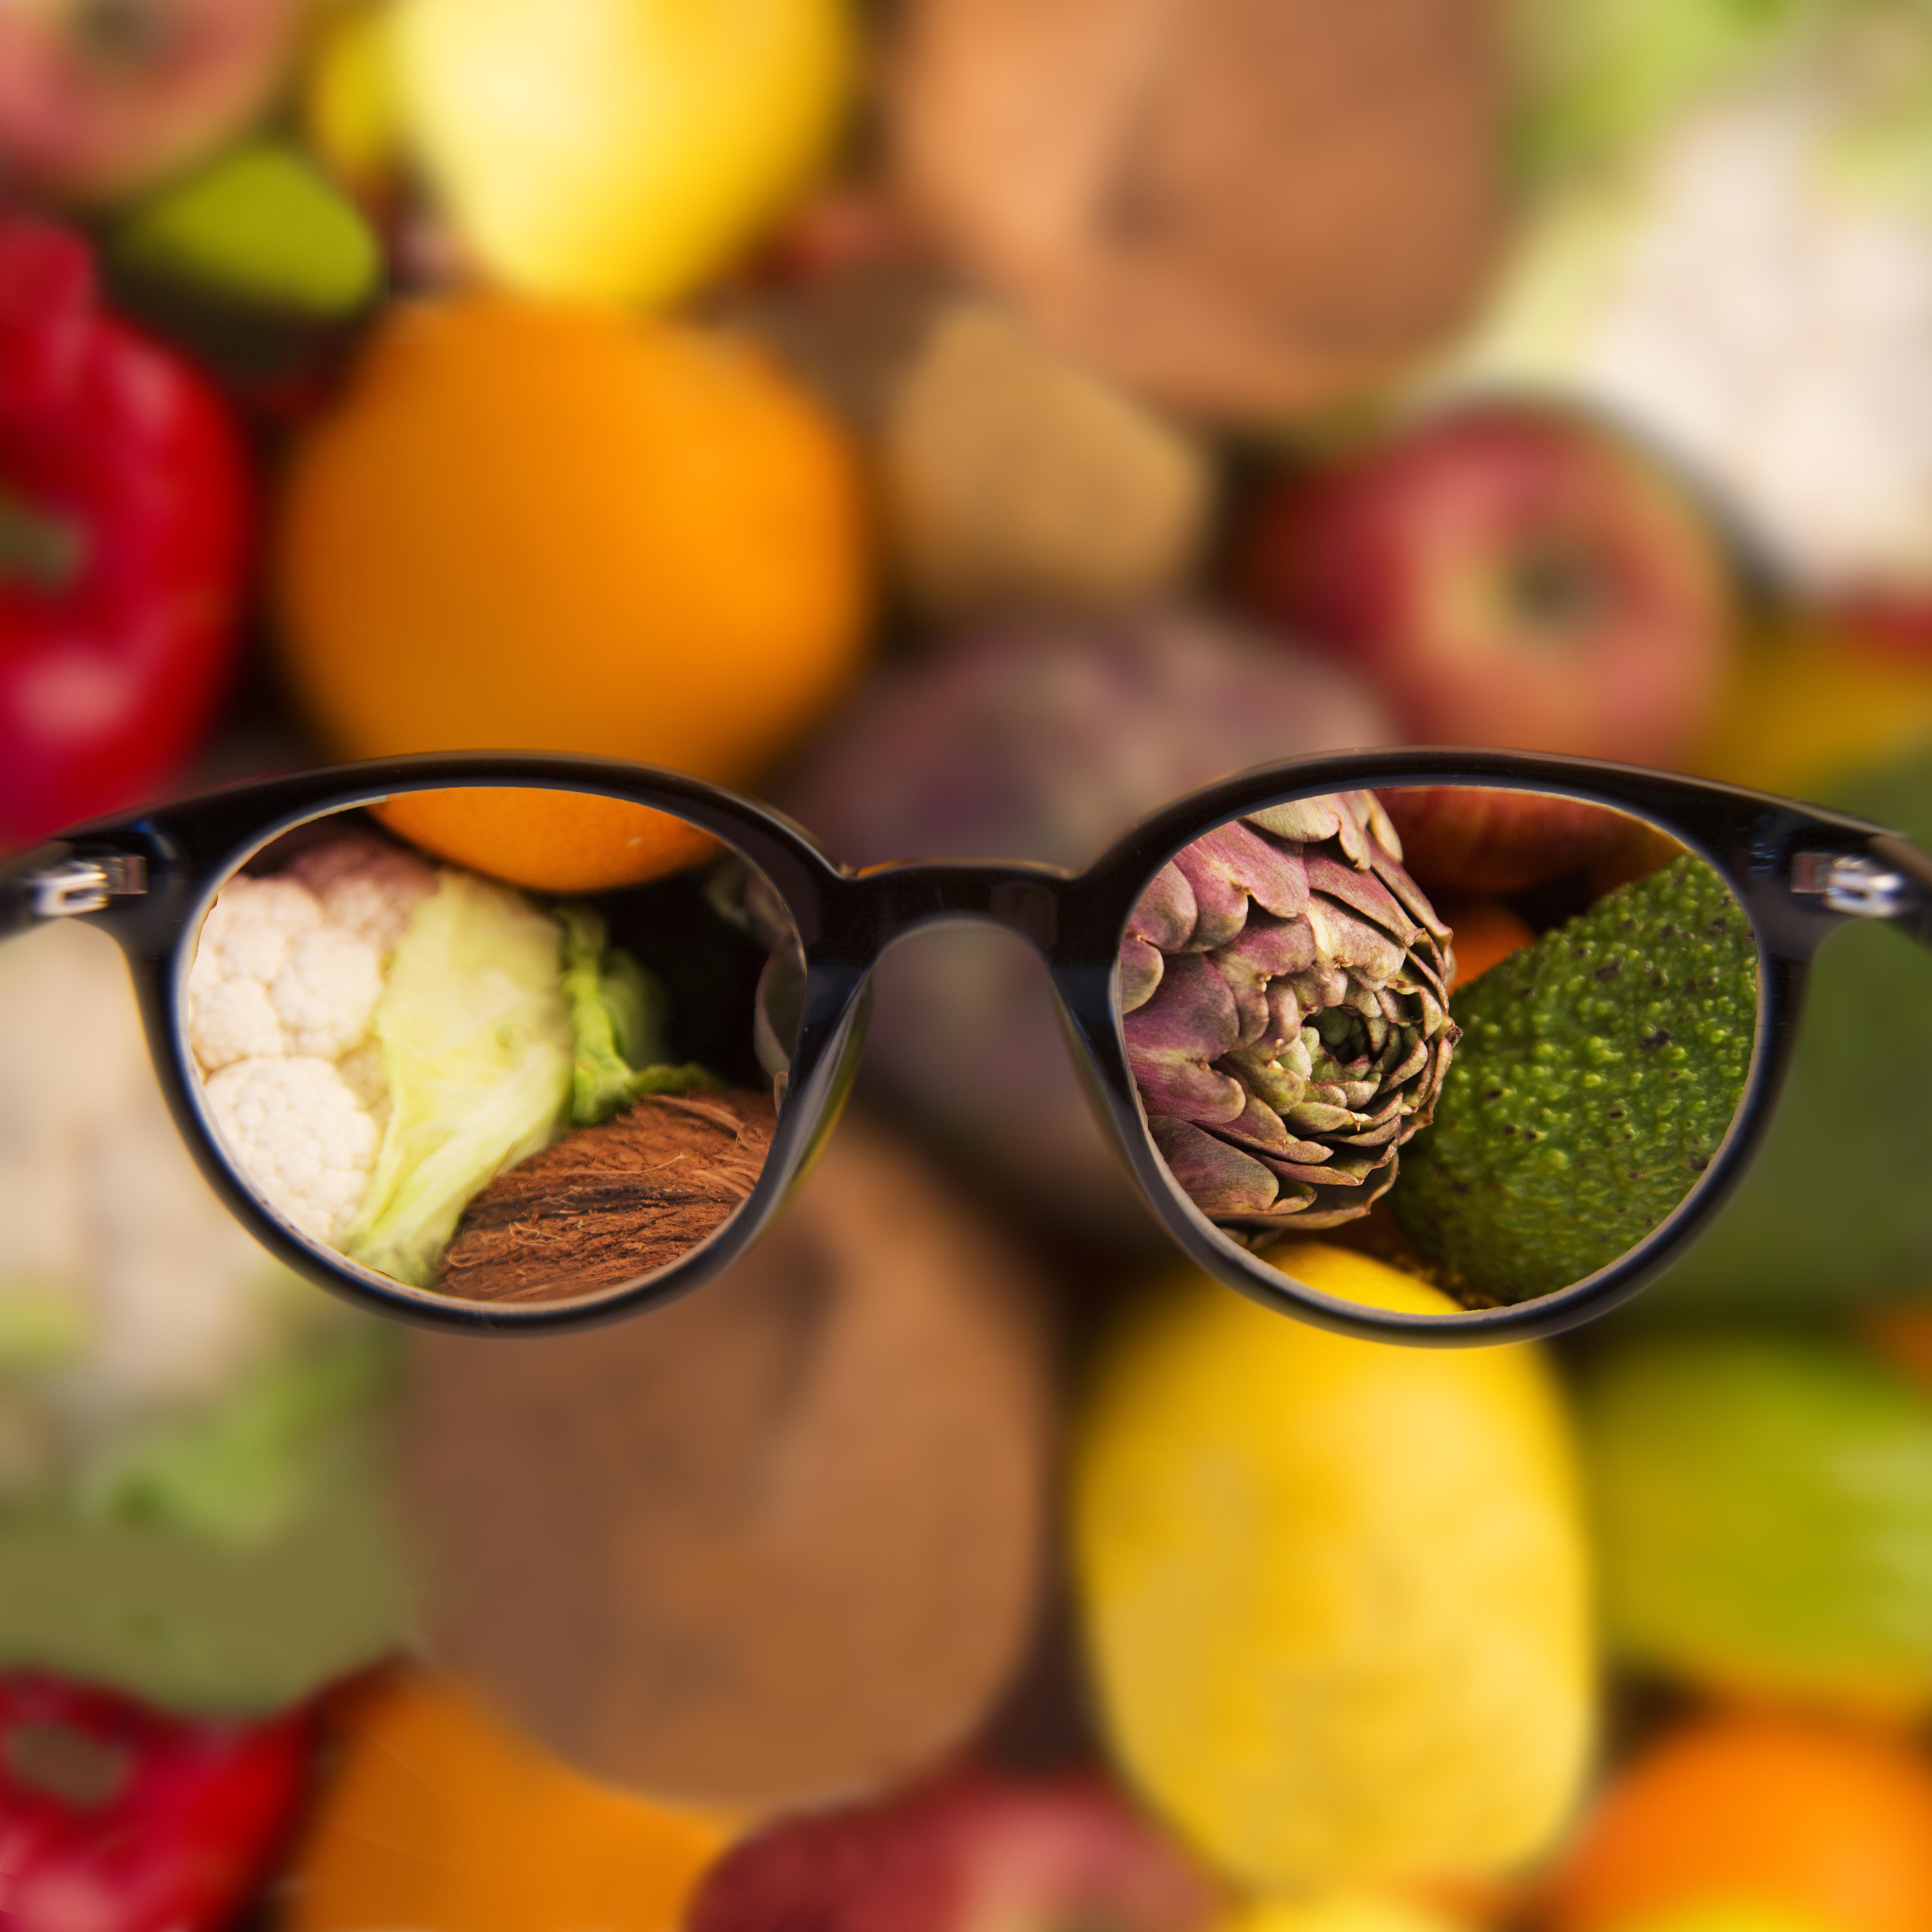 A pair of glasses reflecting a colorful assortment of fruits and vegetables